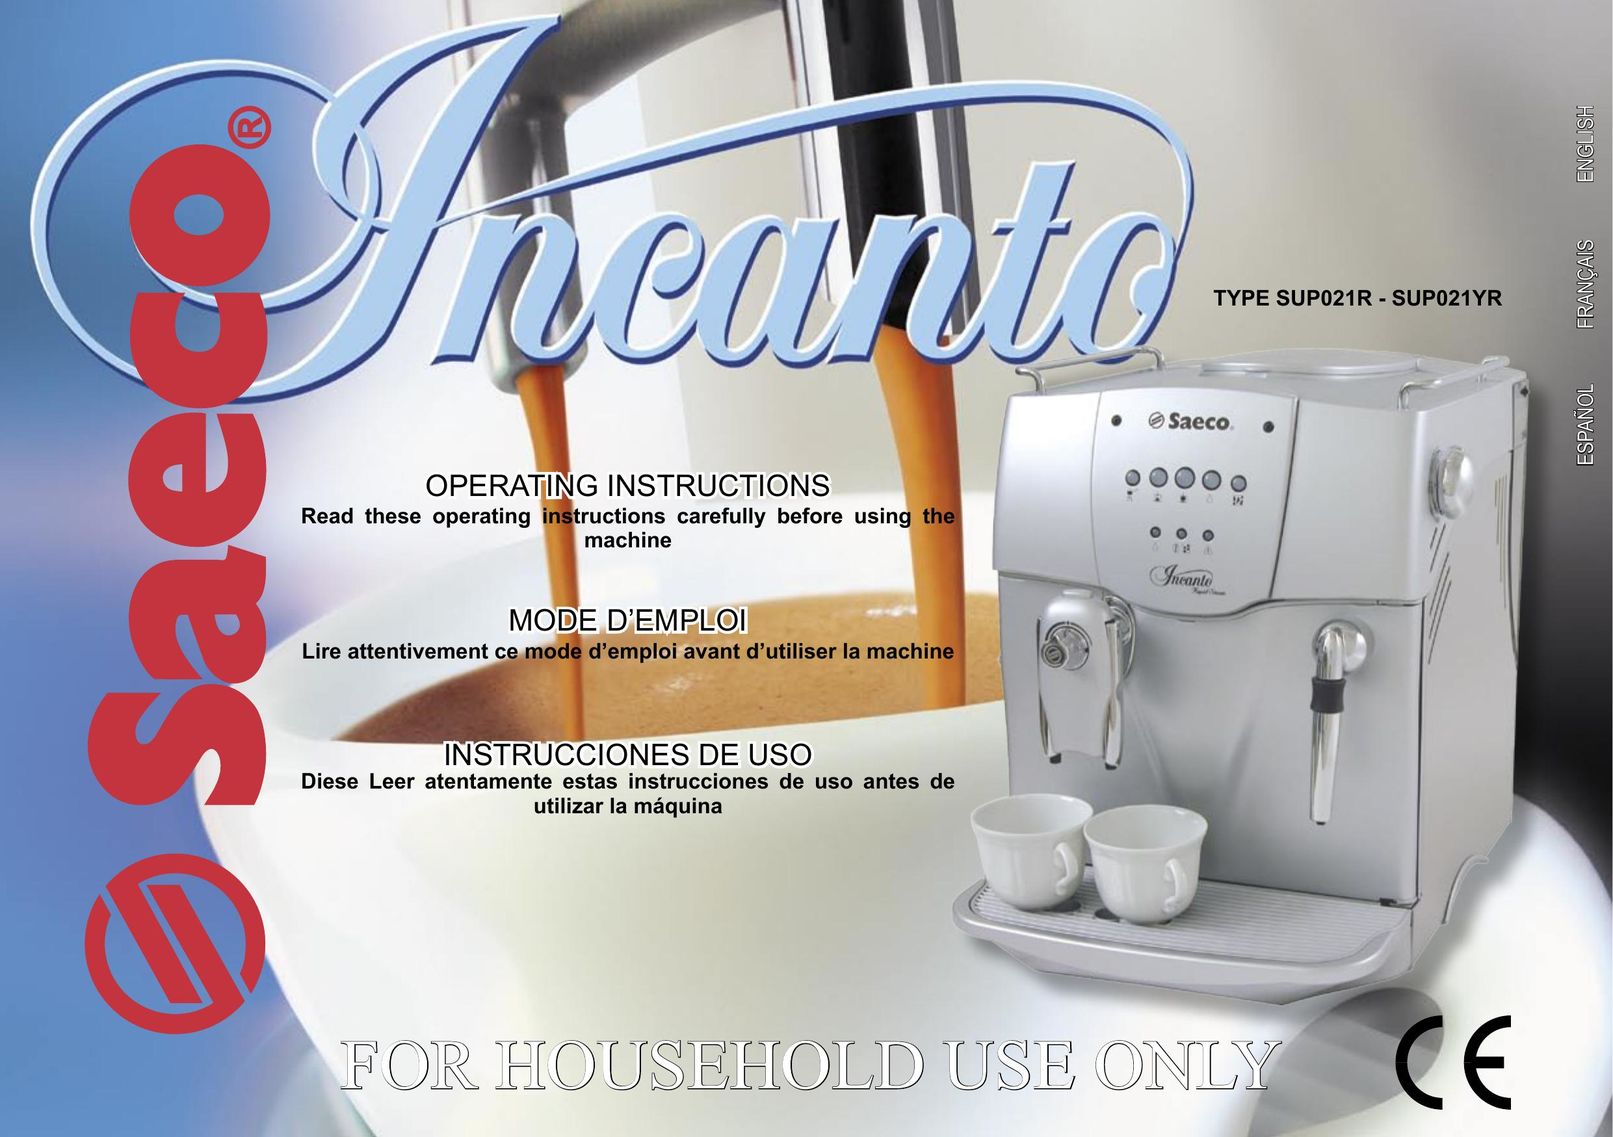 Saeco Coffee Makers SUP021R Network Hardware User Manual